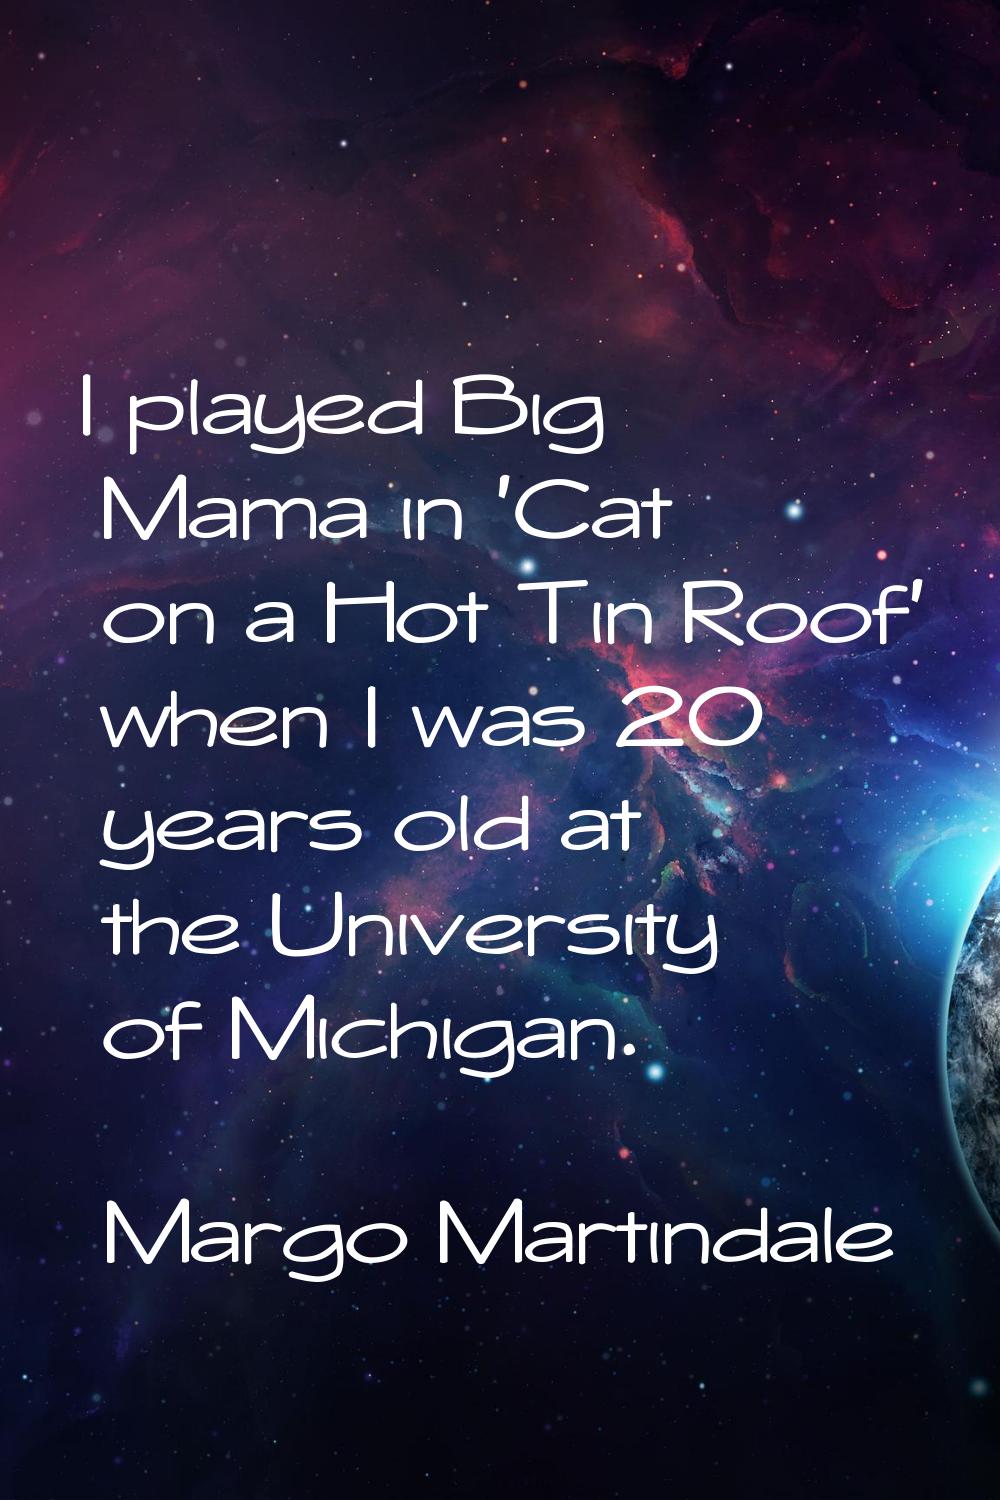 I played Big Mama in 'Cat on a Hot Tin Roof' when I was 20 years old at the University of Michigan.